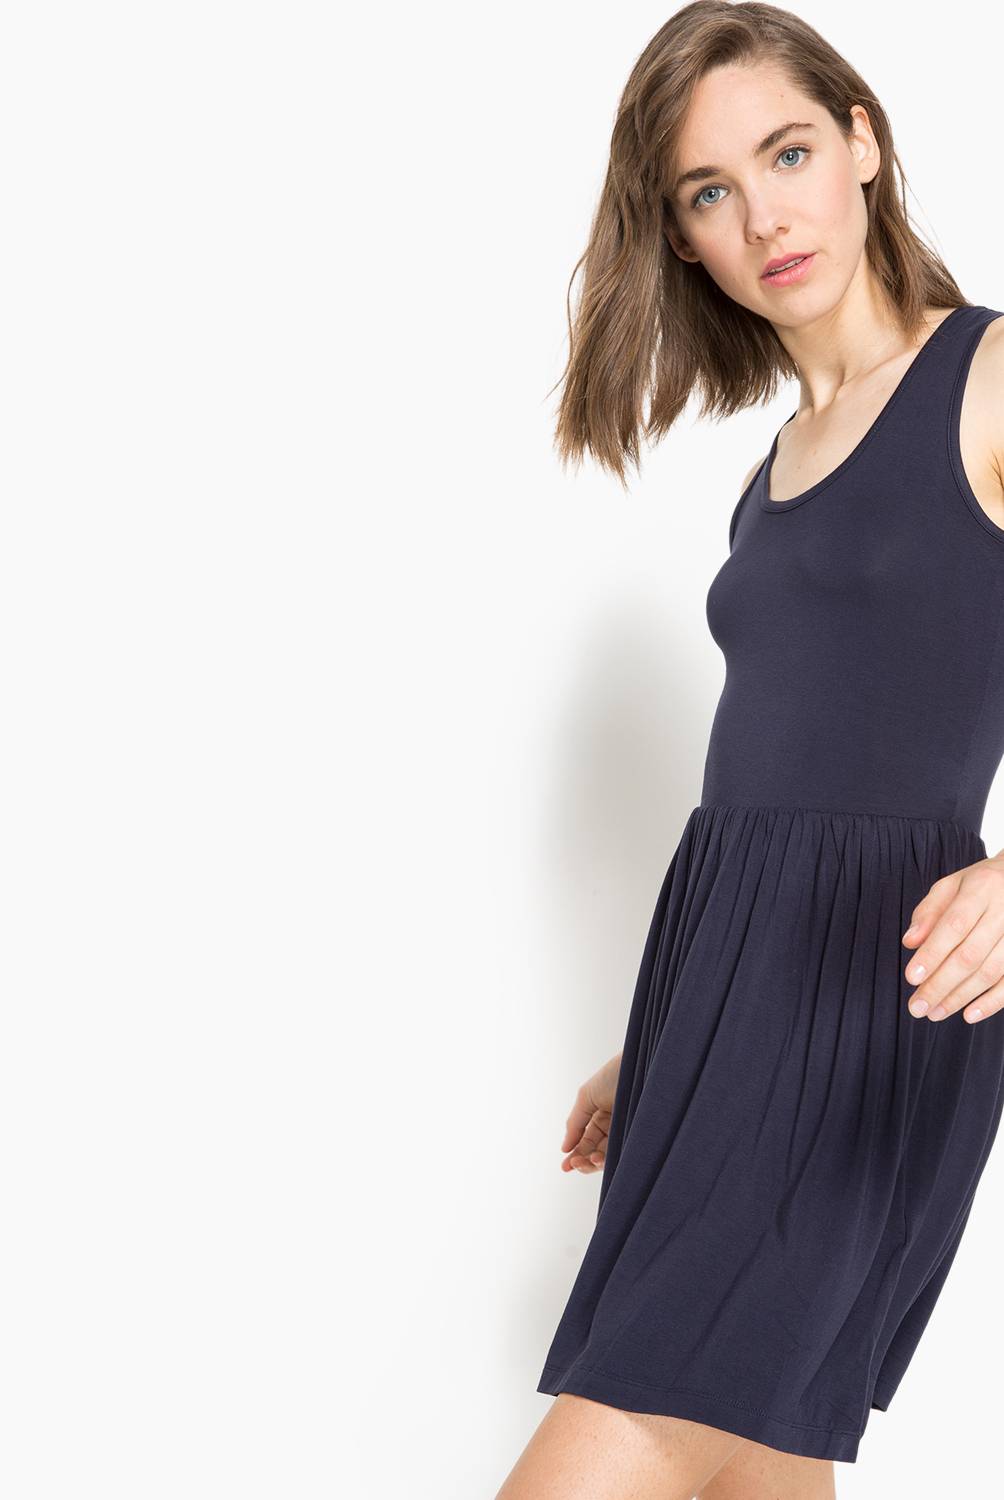 ONLY - Only Vestido Mujer